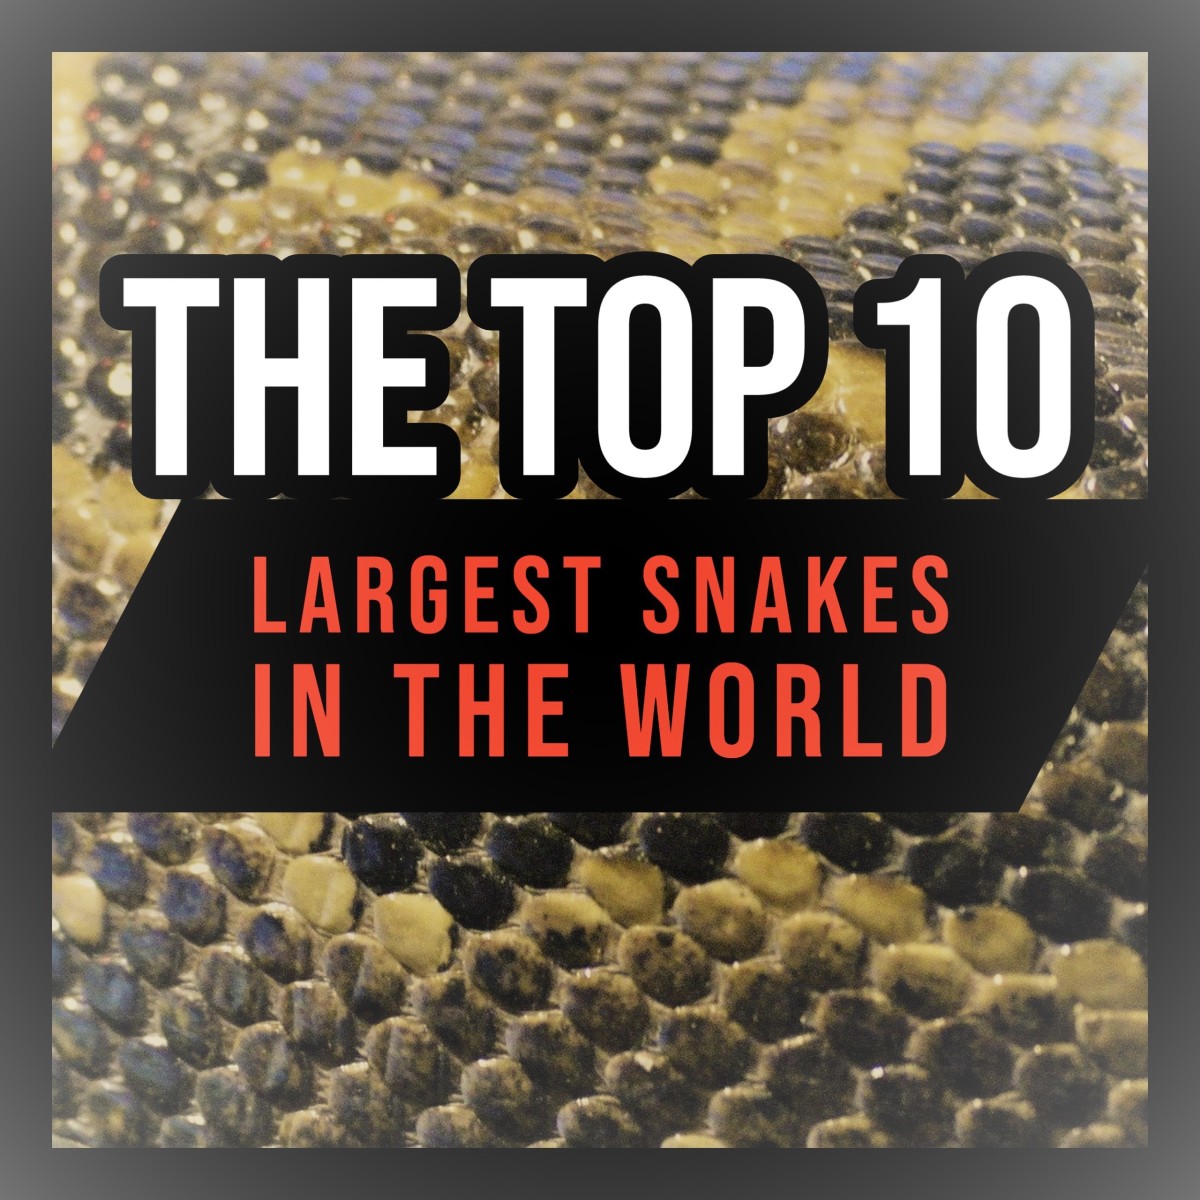 From the boa constrictor to the green anaconda, this article ranks the world's largest species of snake.